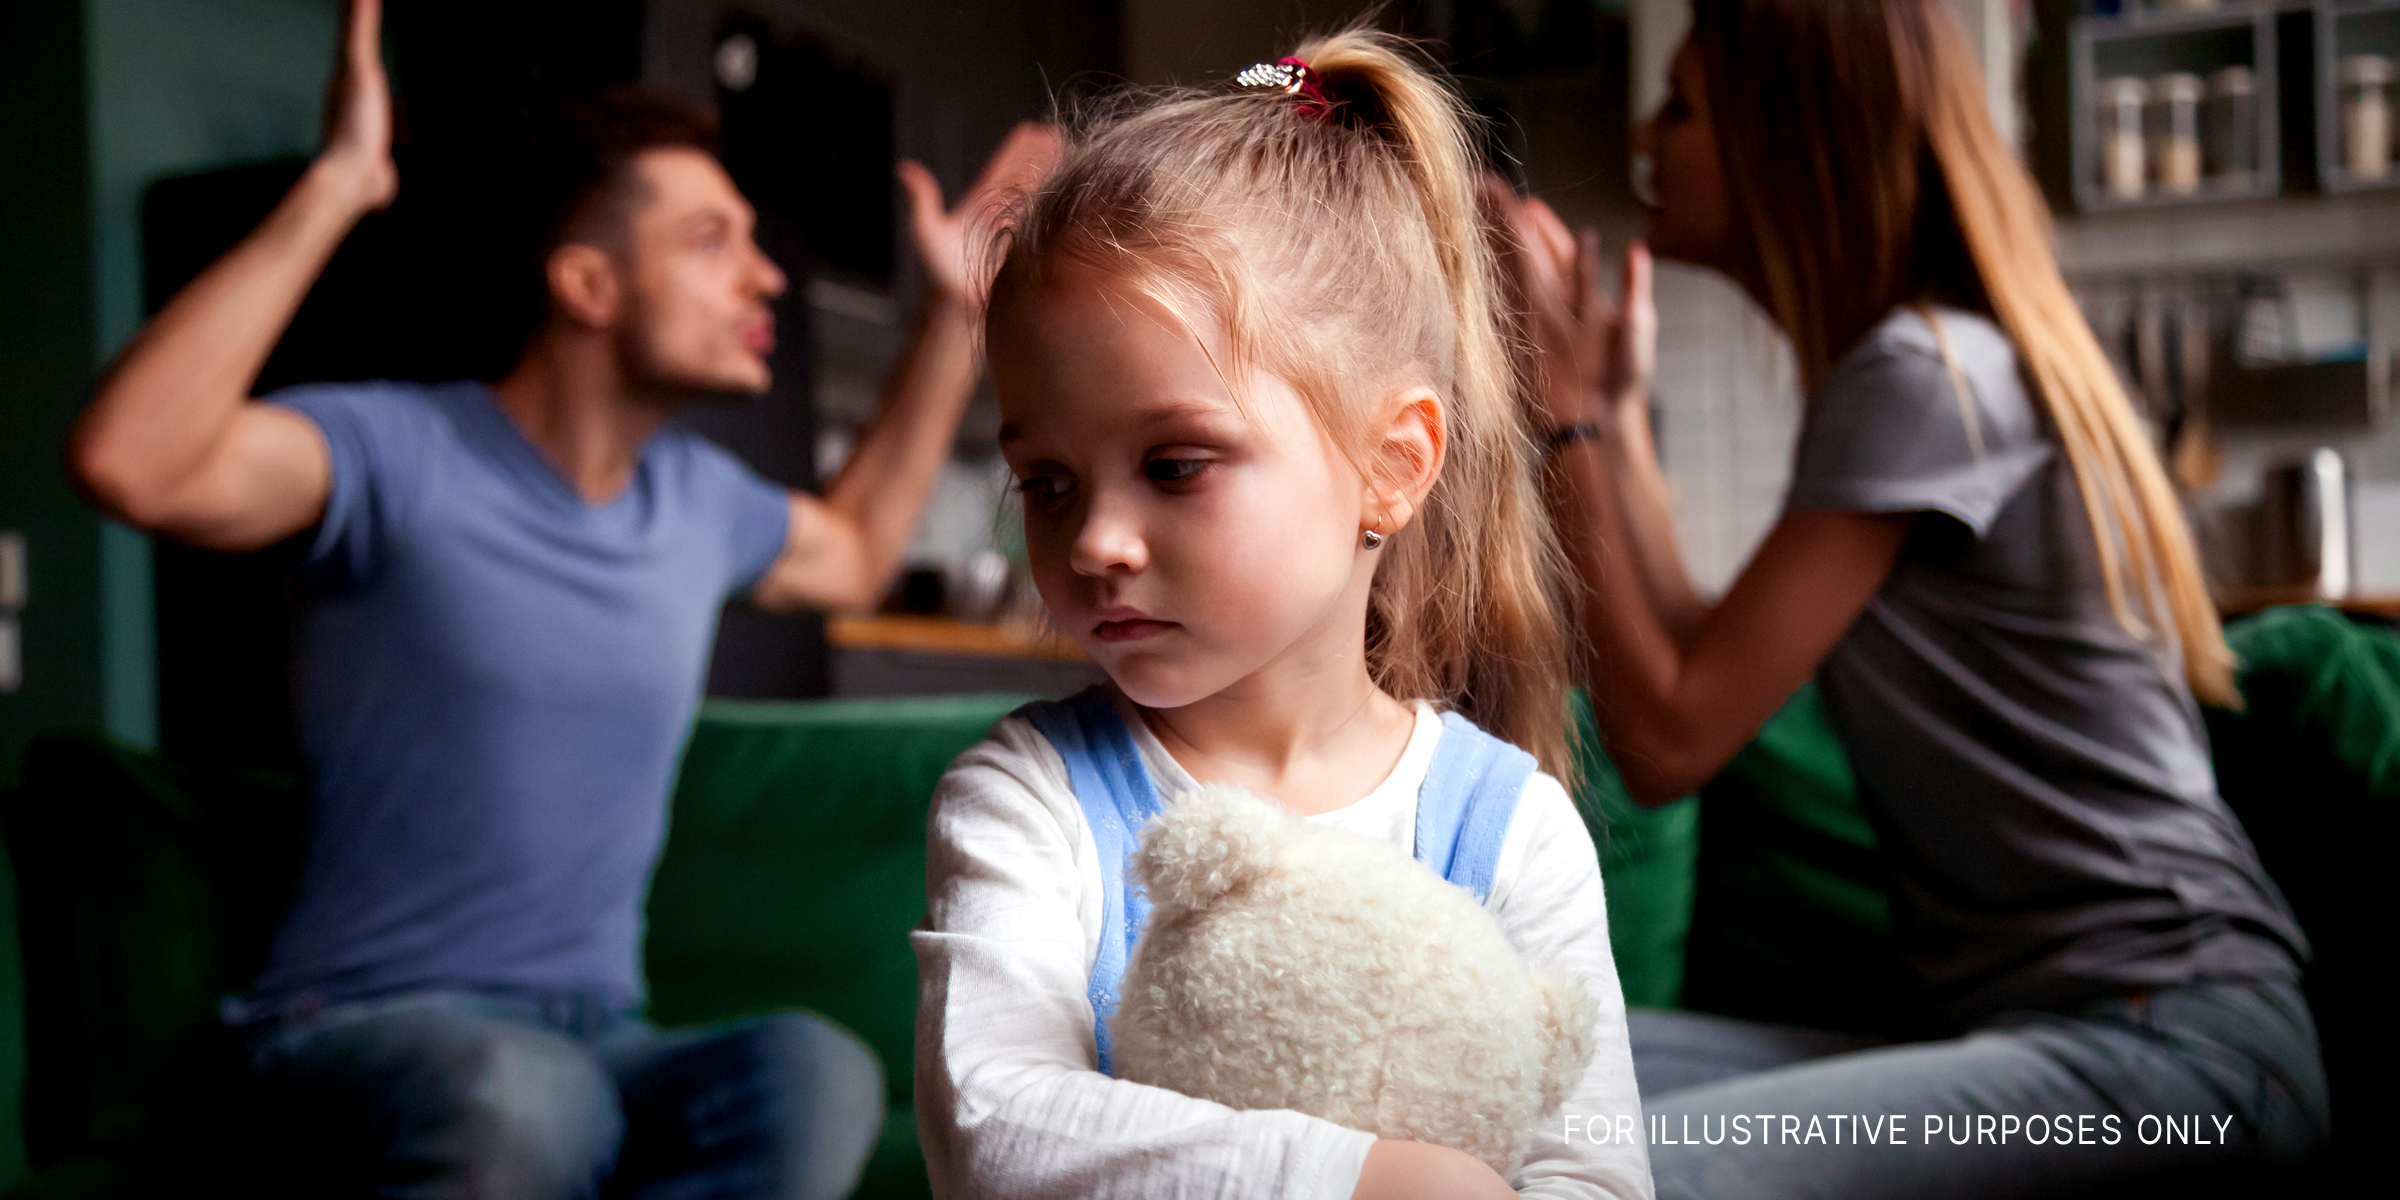 Girl feeling sad while her parents have an argument | Source: Shutterstock